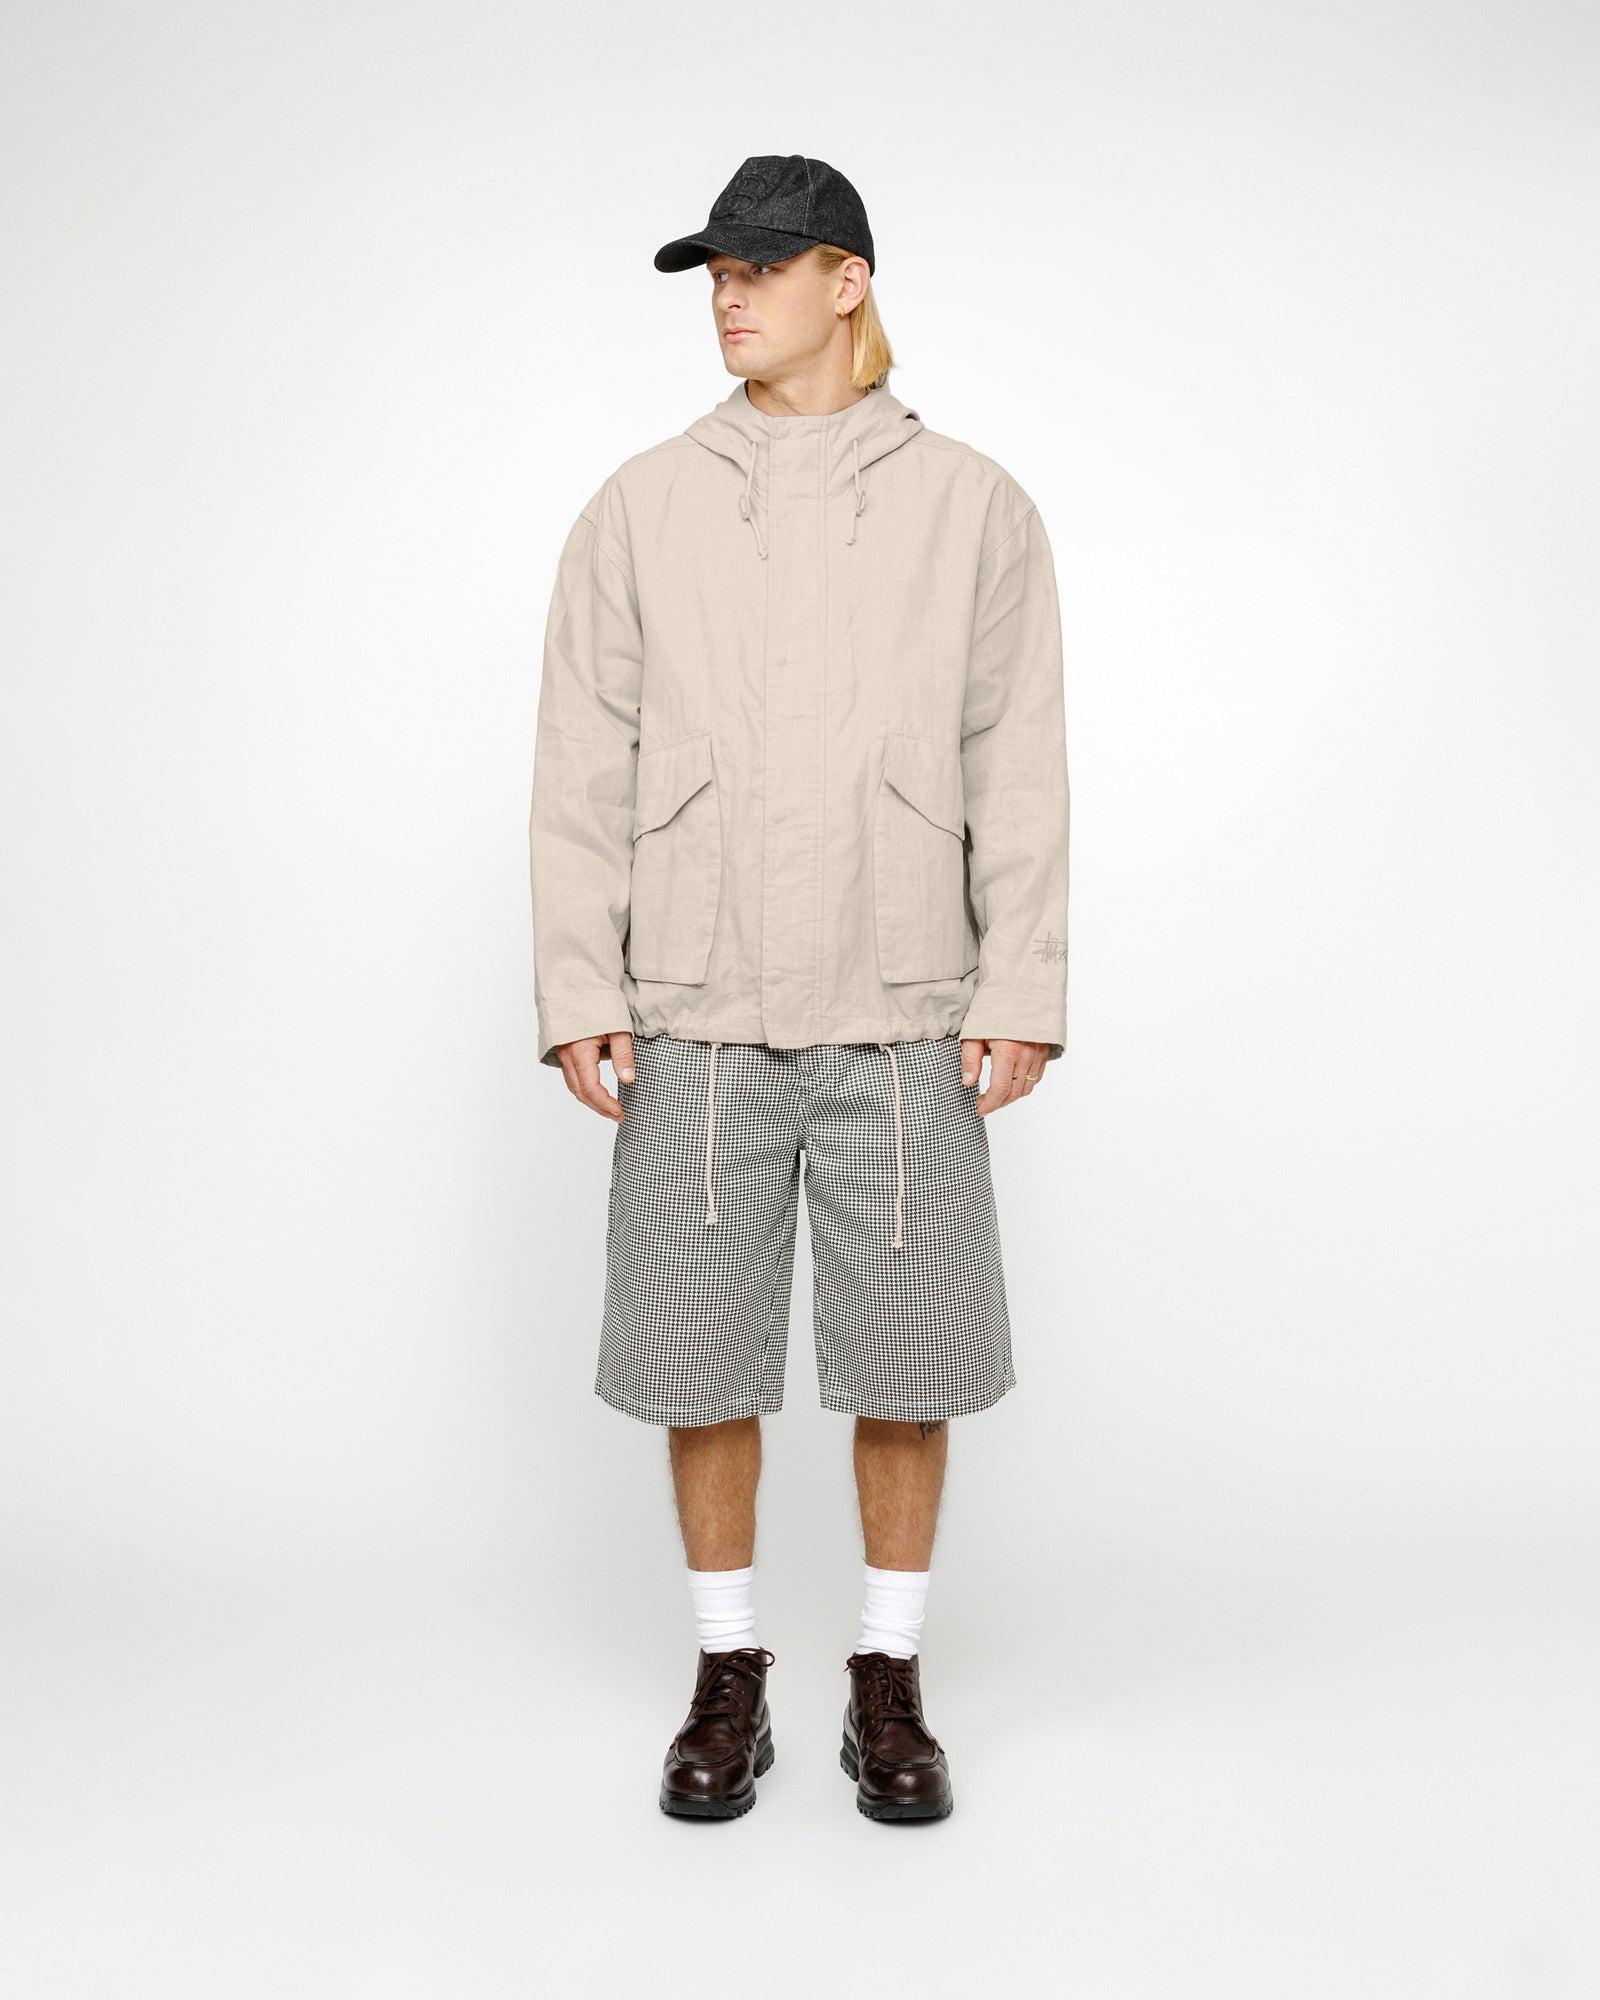 STUSSY WORKGEAR SHORTS TWILL HOUNDSTOOTH BOTTOMS